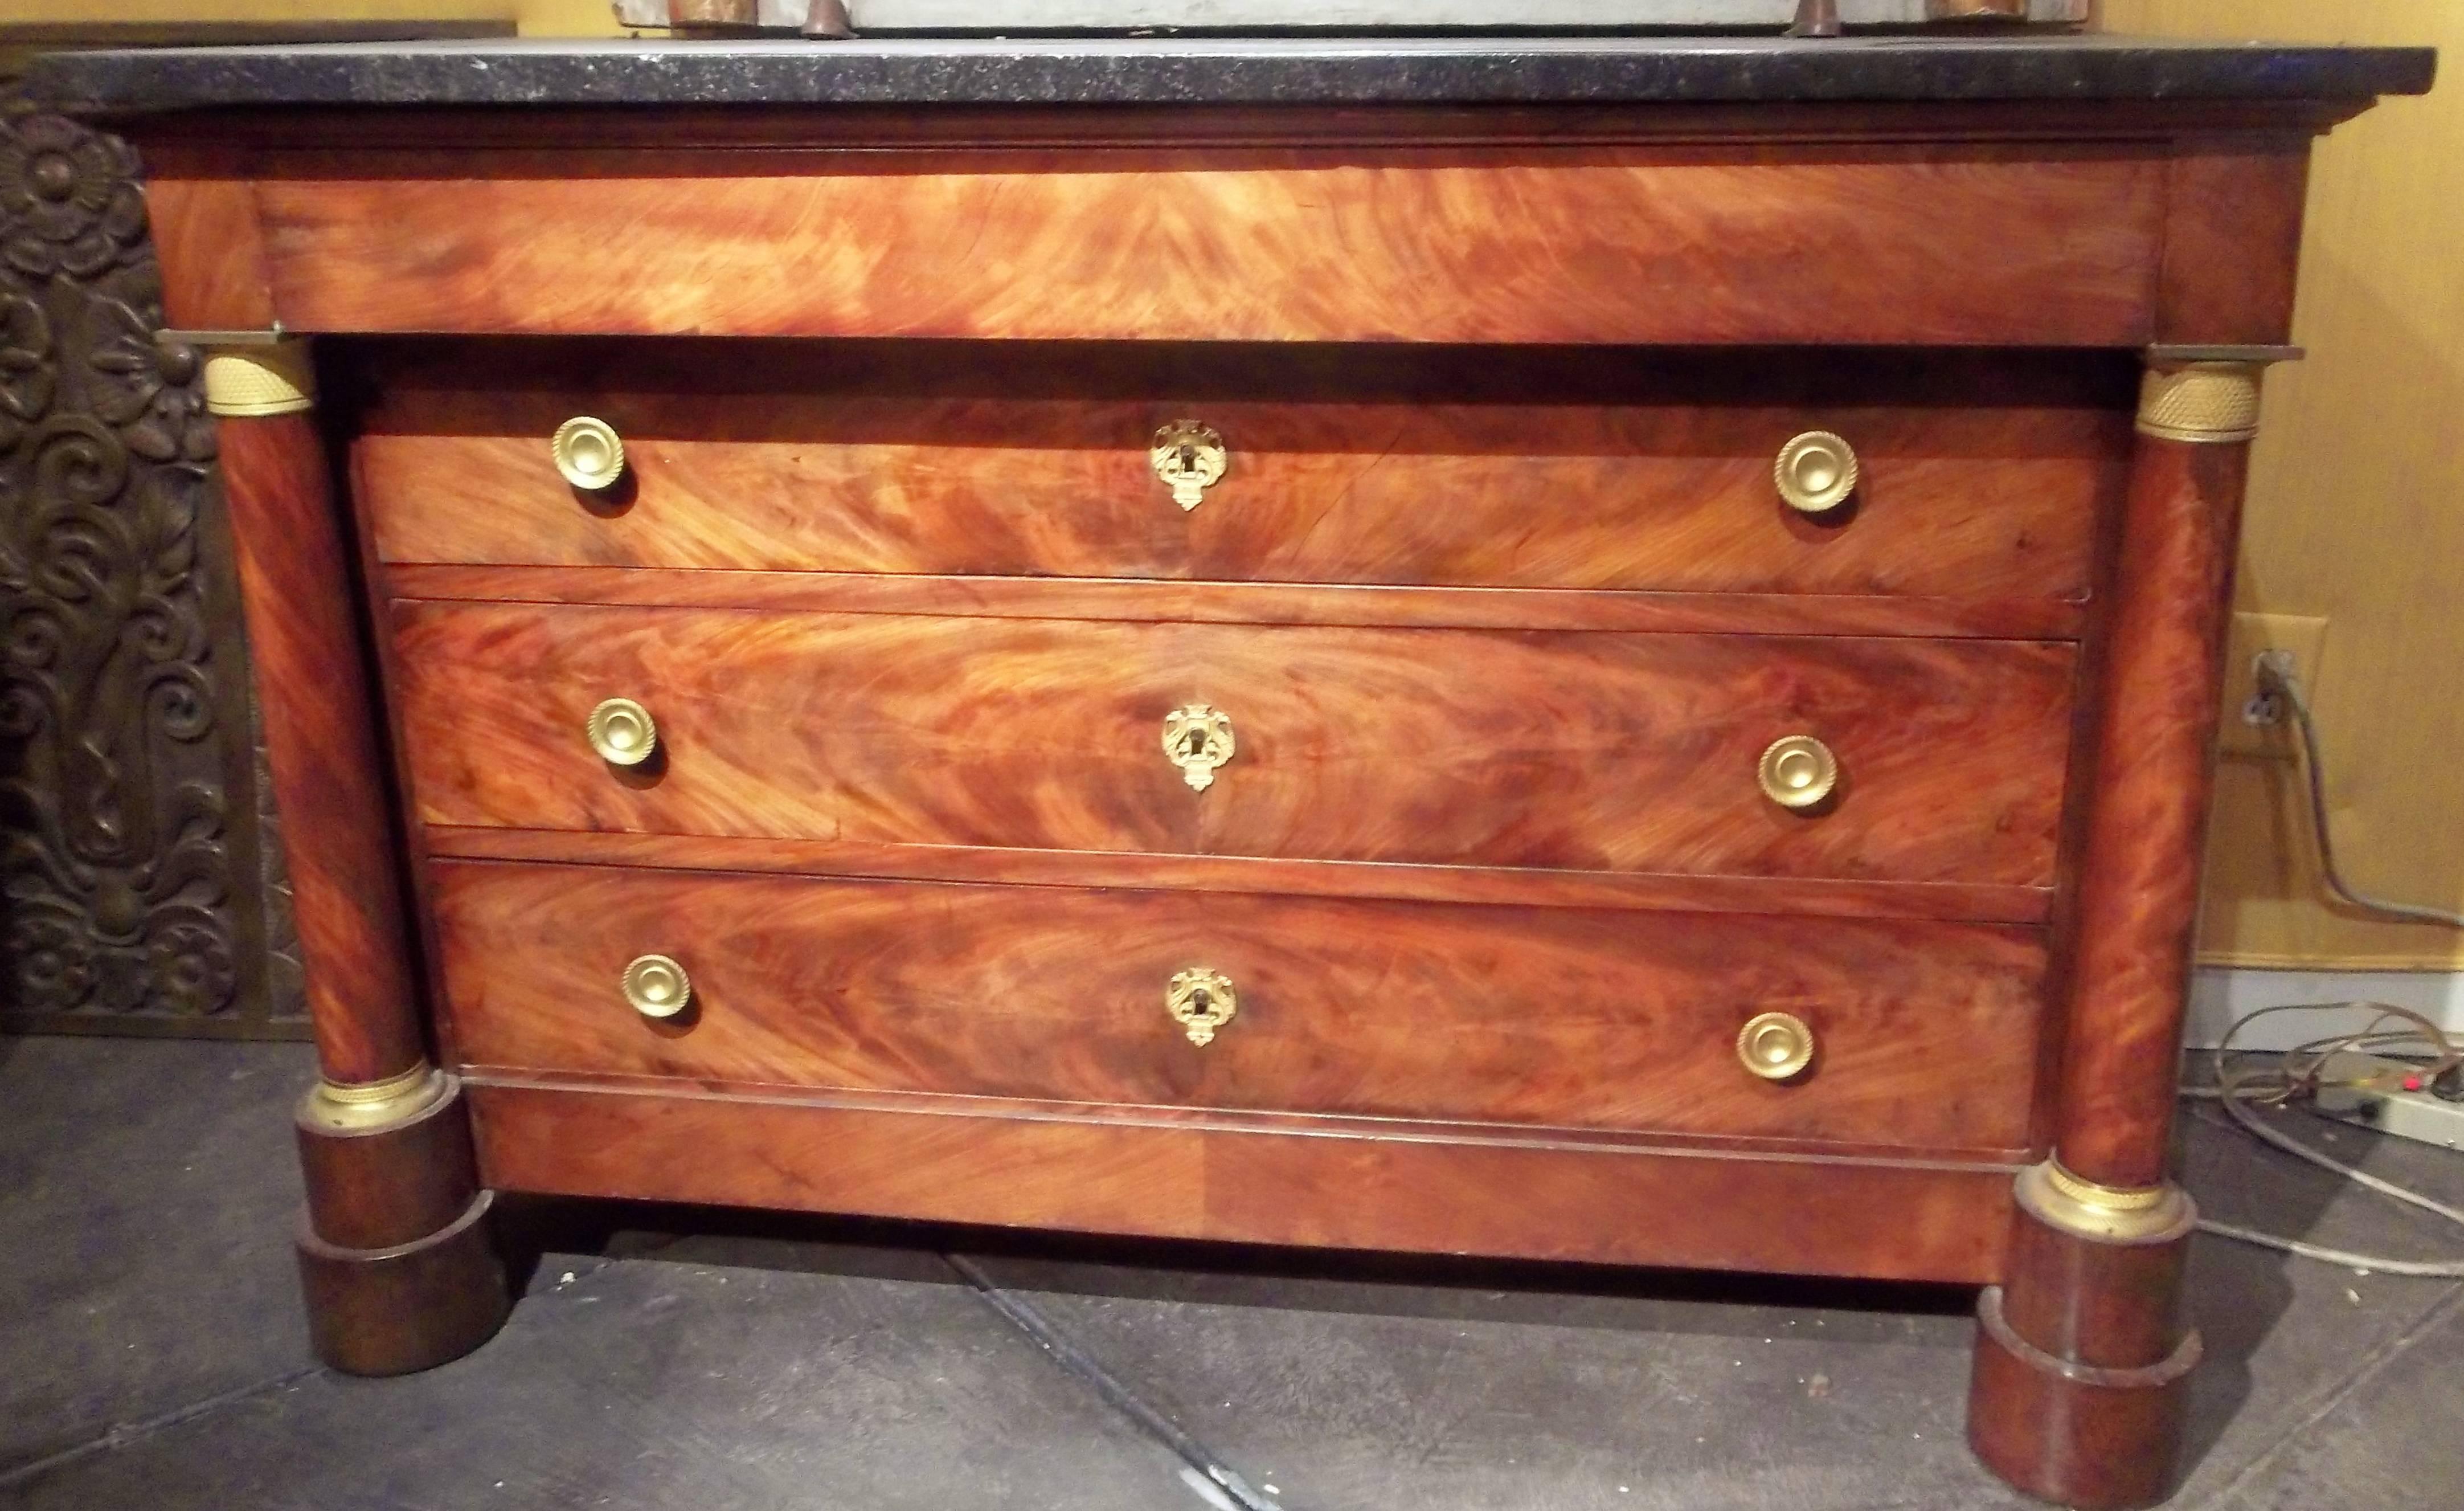 A charmingly faded mahogany chest producing a warm mellow patina. The highly figured wood producing swirls of brown, gold, red accented by very finely cast and chiseled ormolu mounts.

Probably Second Empire or mid-19th century.